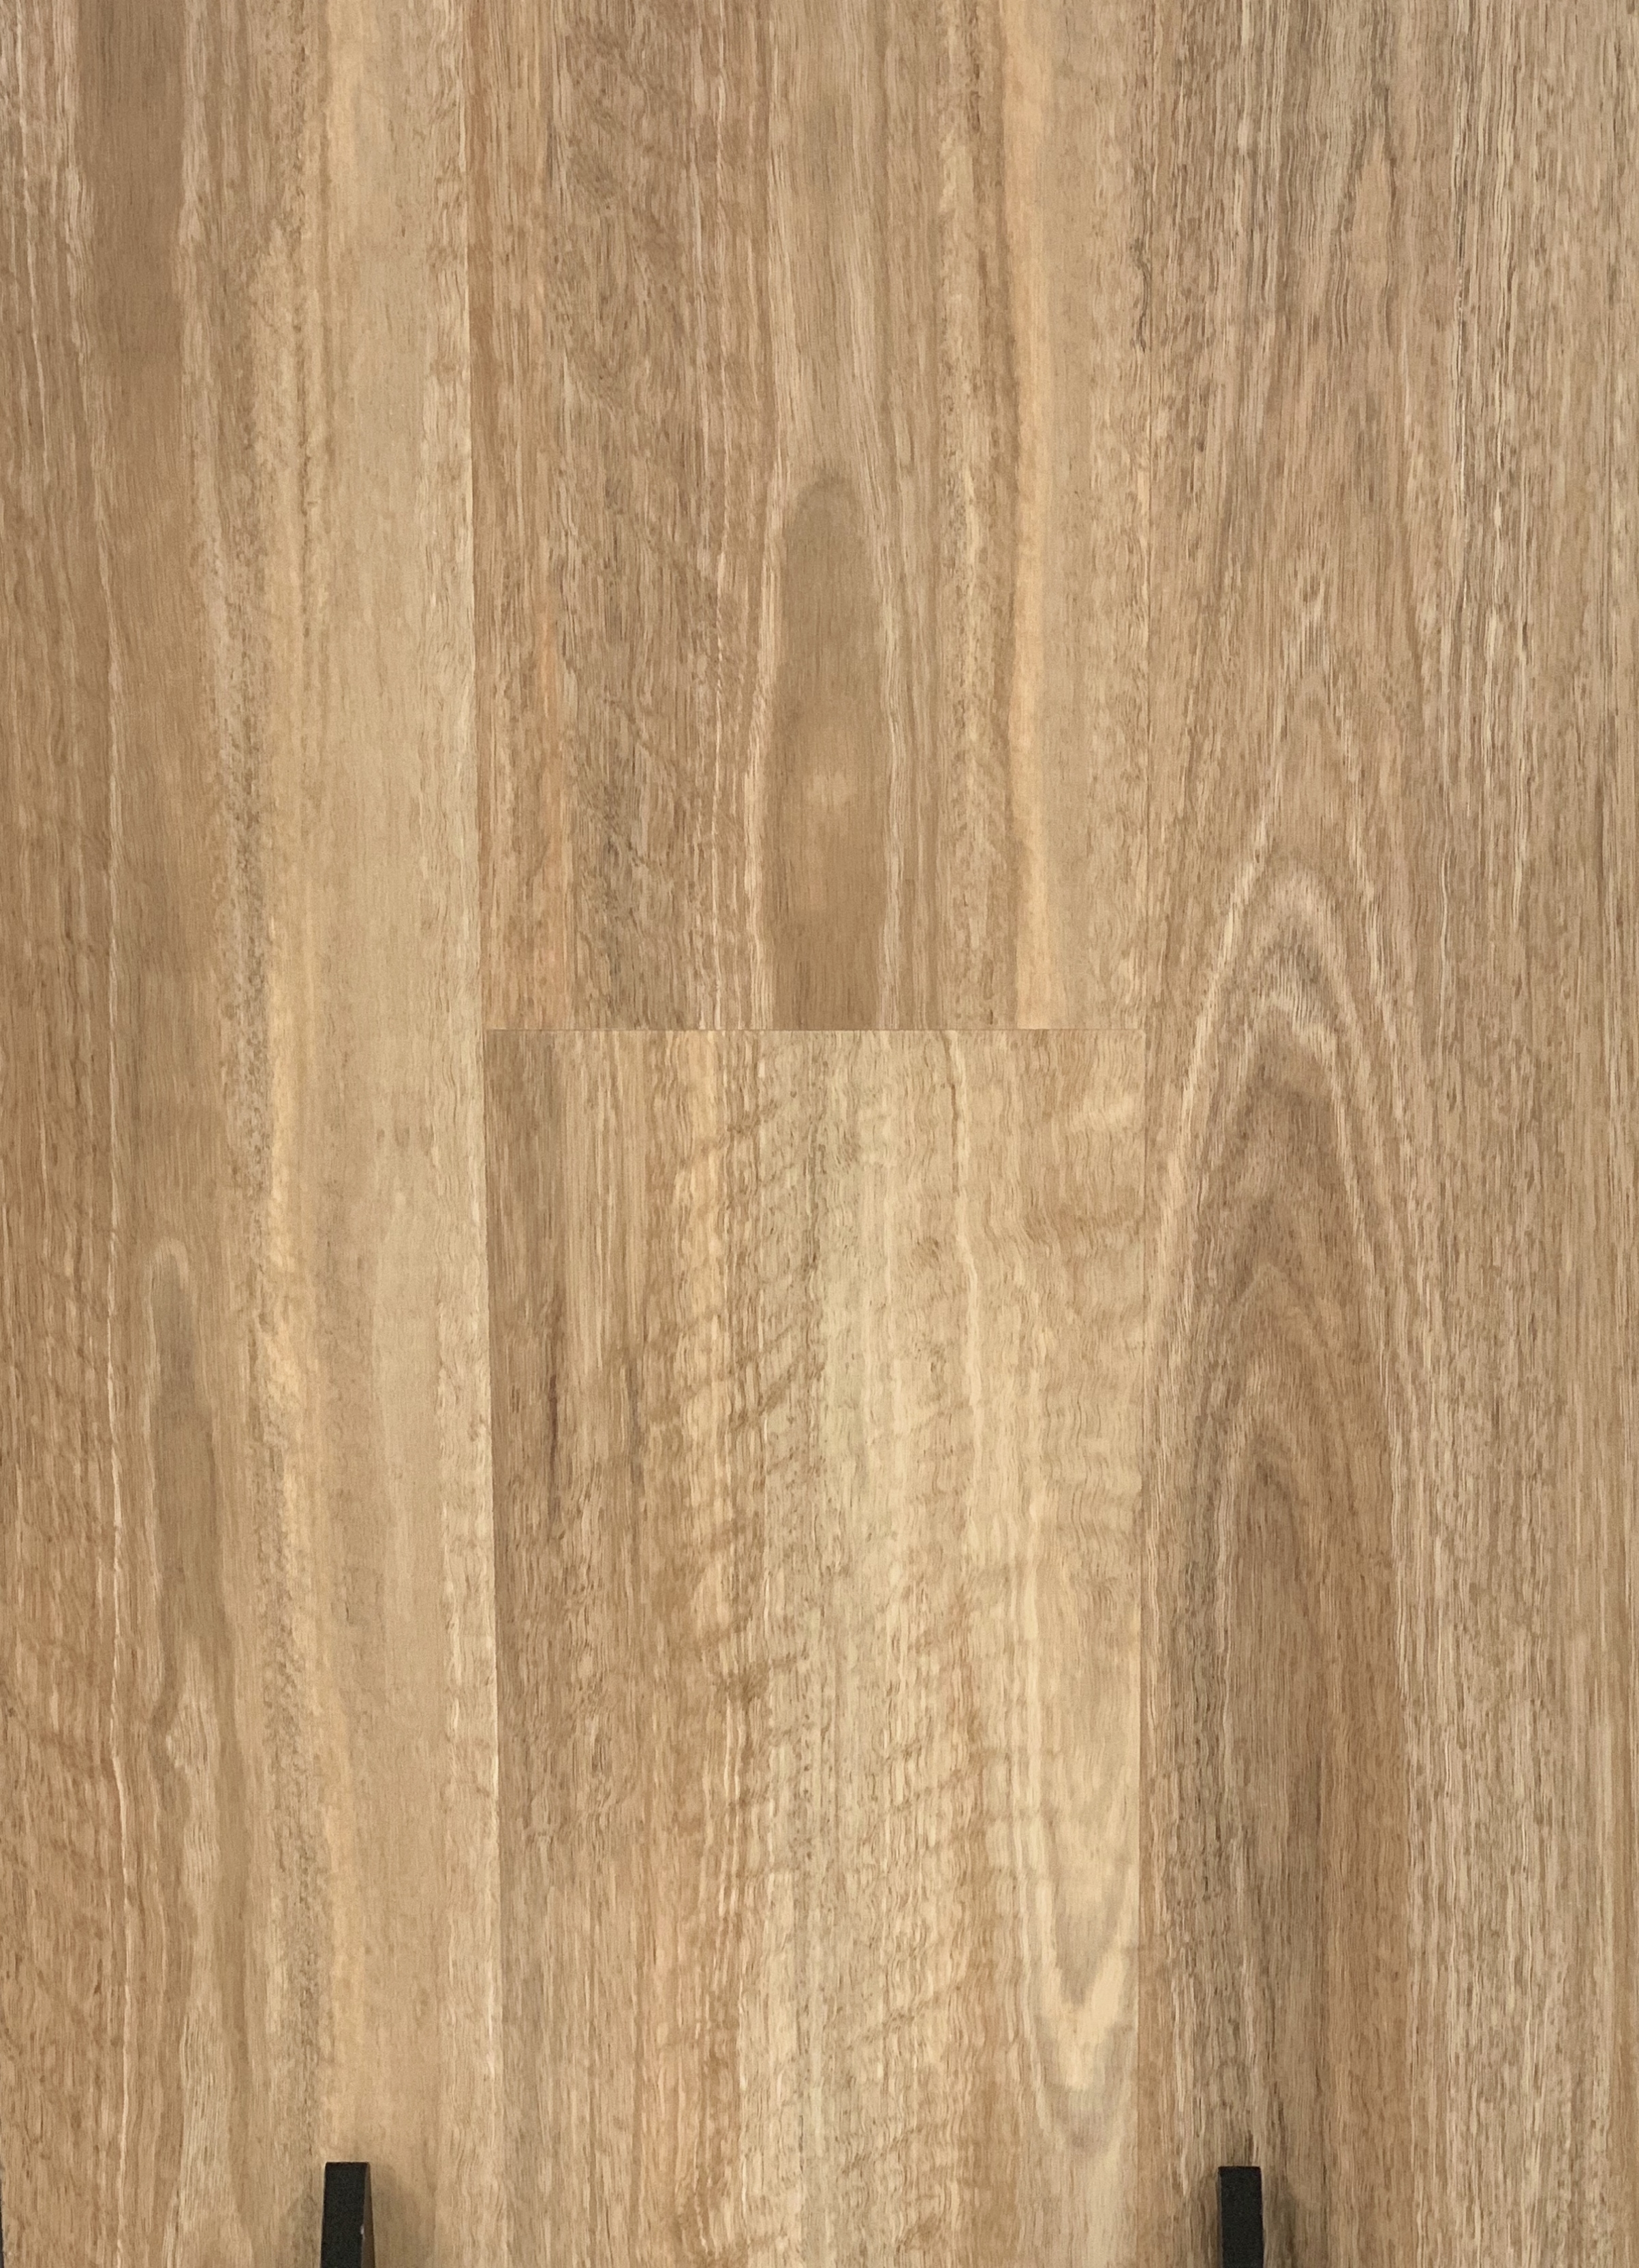 Hybrid flooring suppliers Spotted gum product